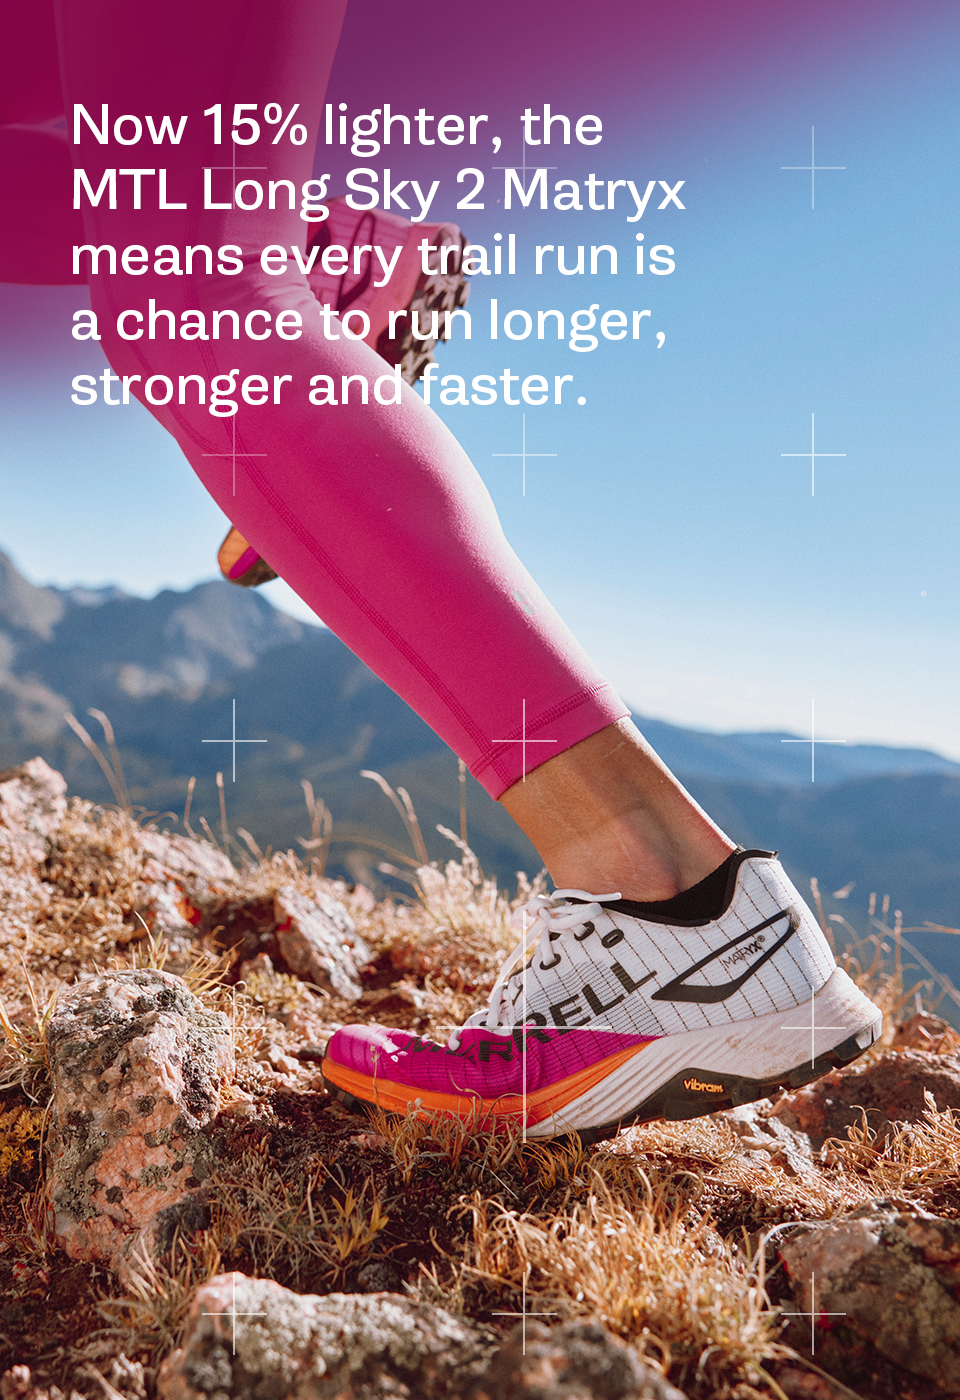 Now 15% lighter, the MTL Long Sky 2 Matryx means every trail run is a chance to run longer, stronger and faster.